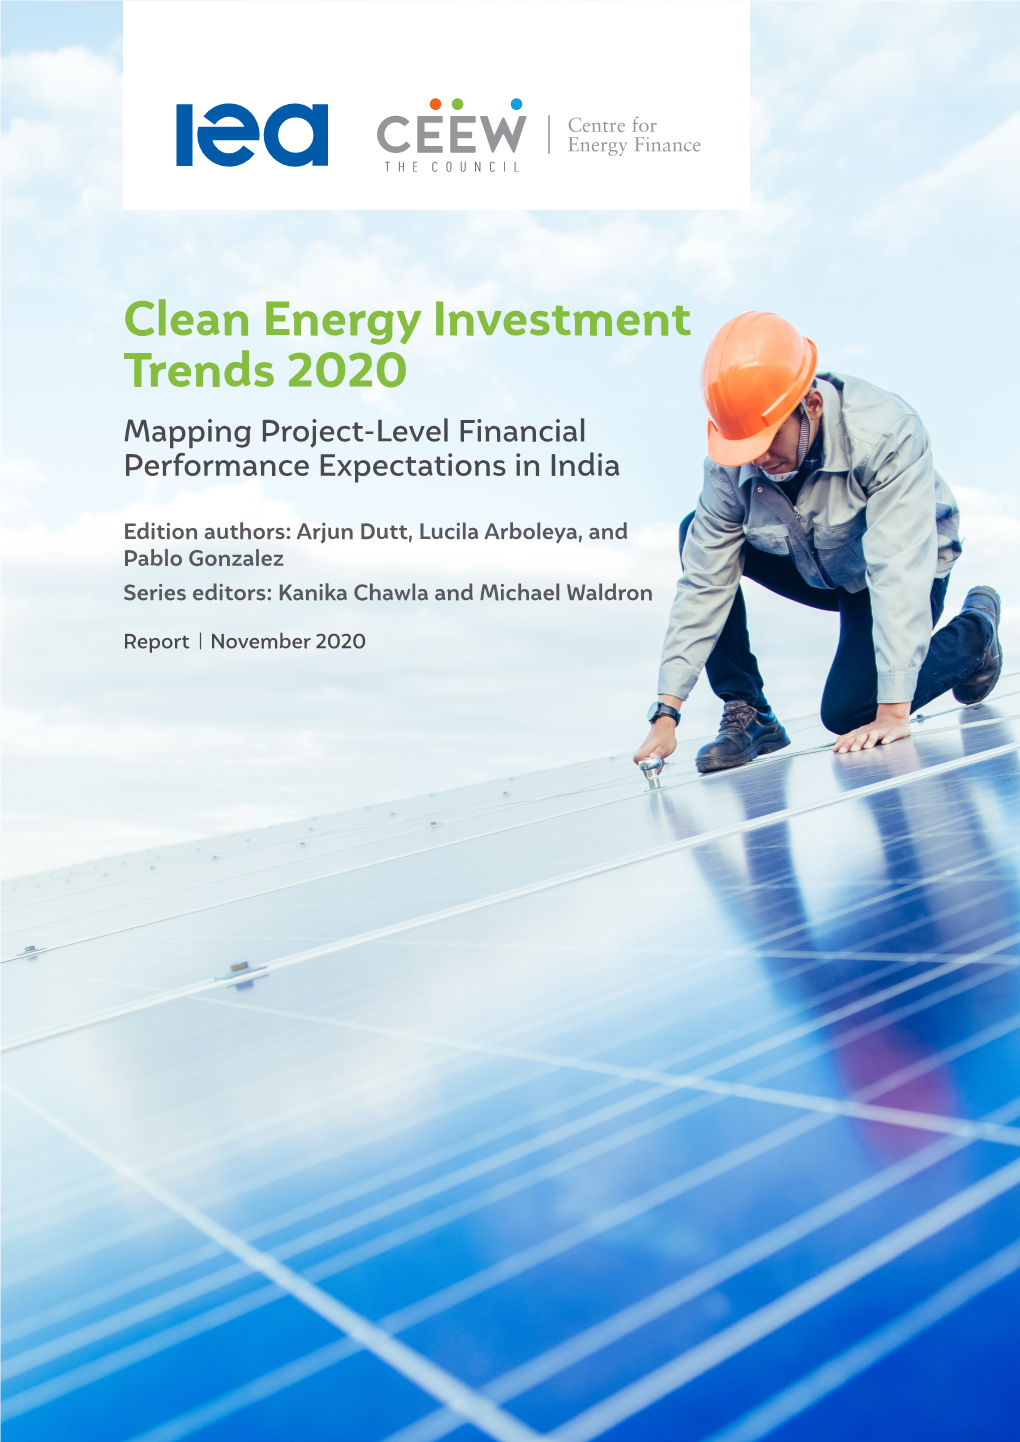 Clean Energy Investment Trends 2020: Mapping Project-Level Financial Performance Expectations in India